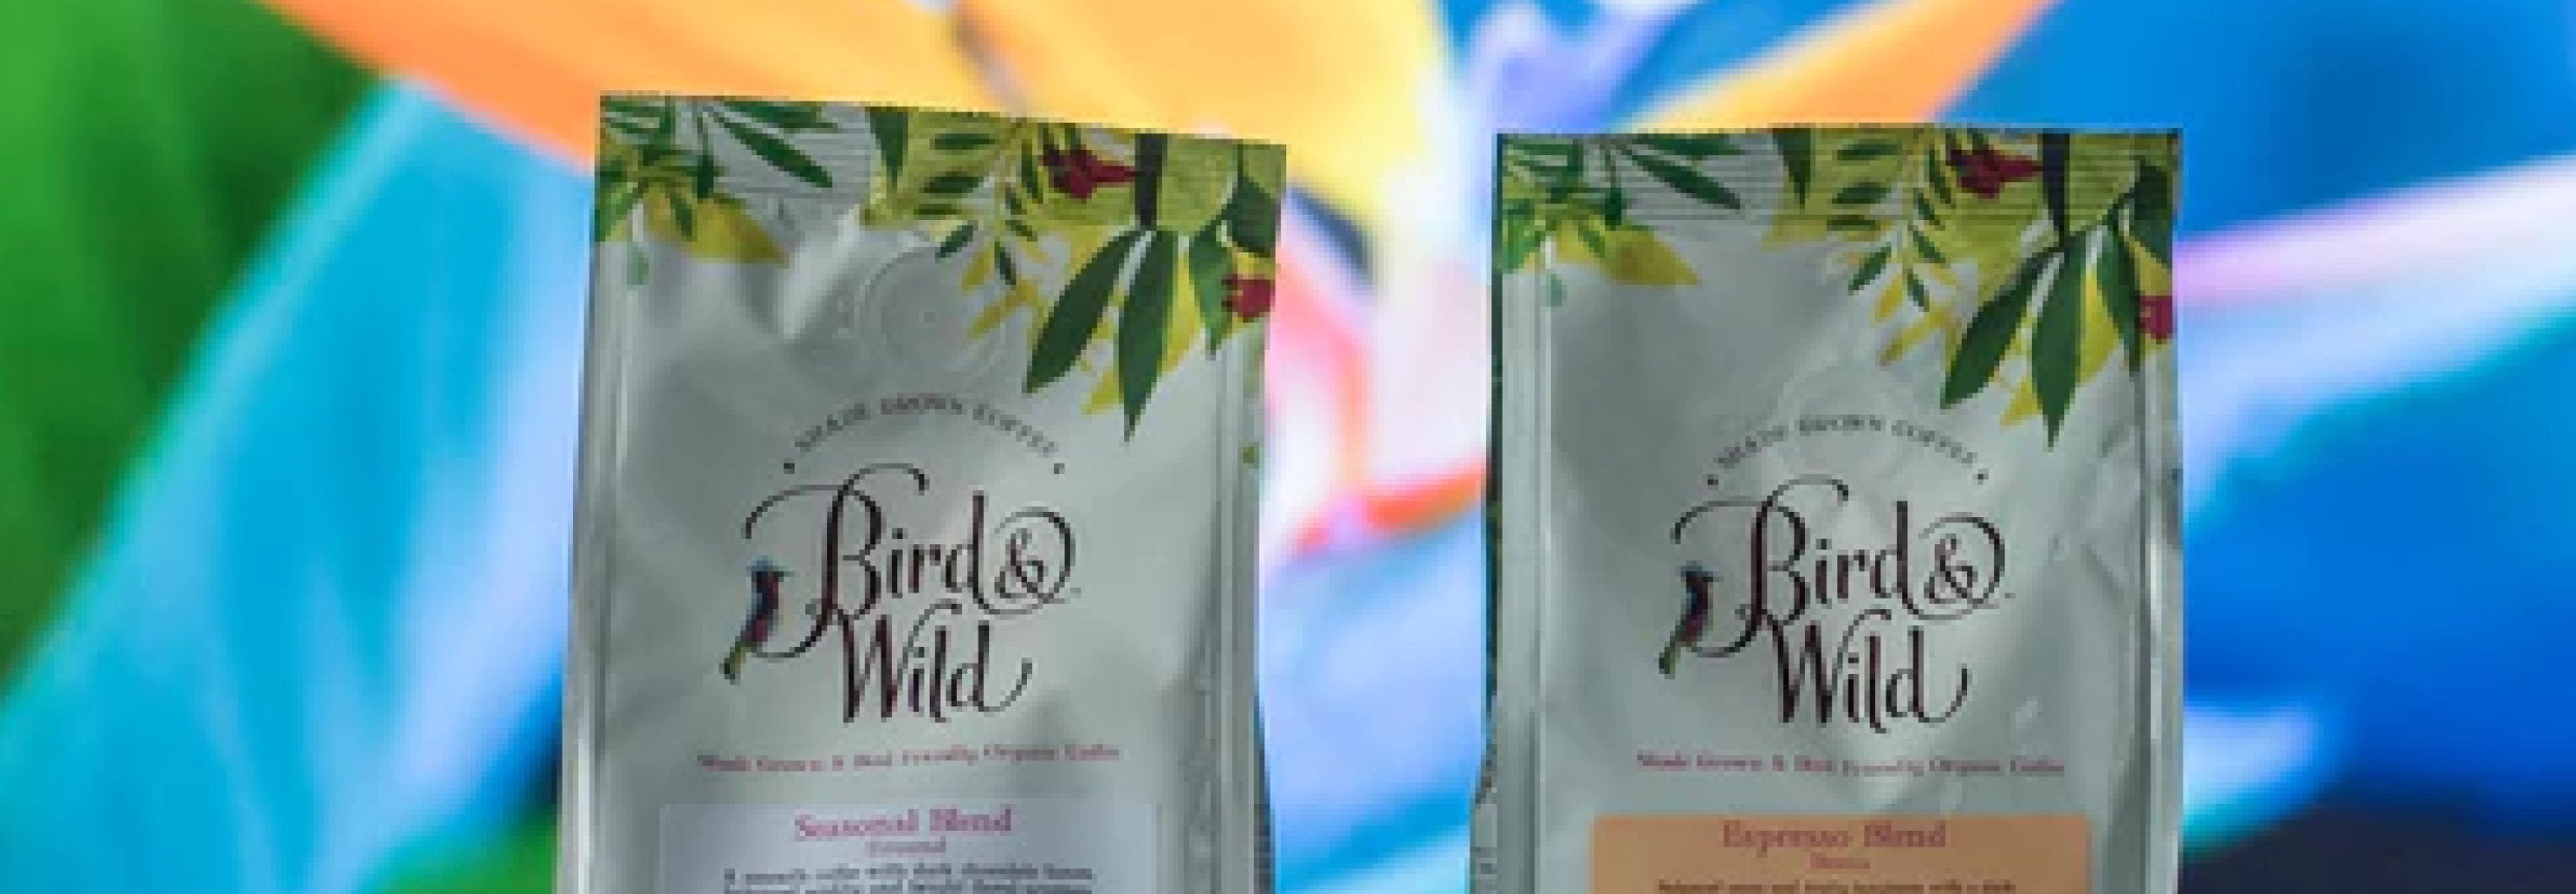 Who are we? Find out more about Bird & Wild Coffee - Bird & Wild Coffee